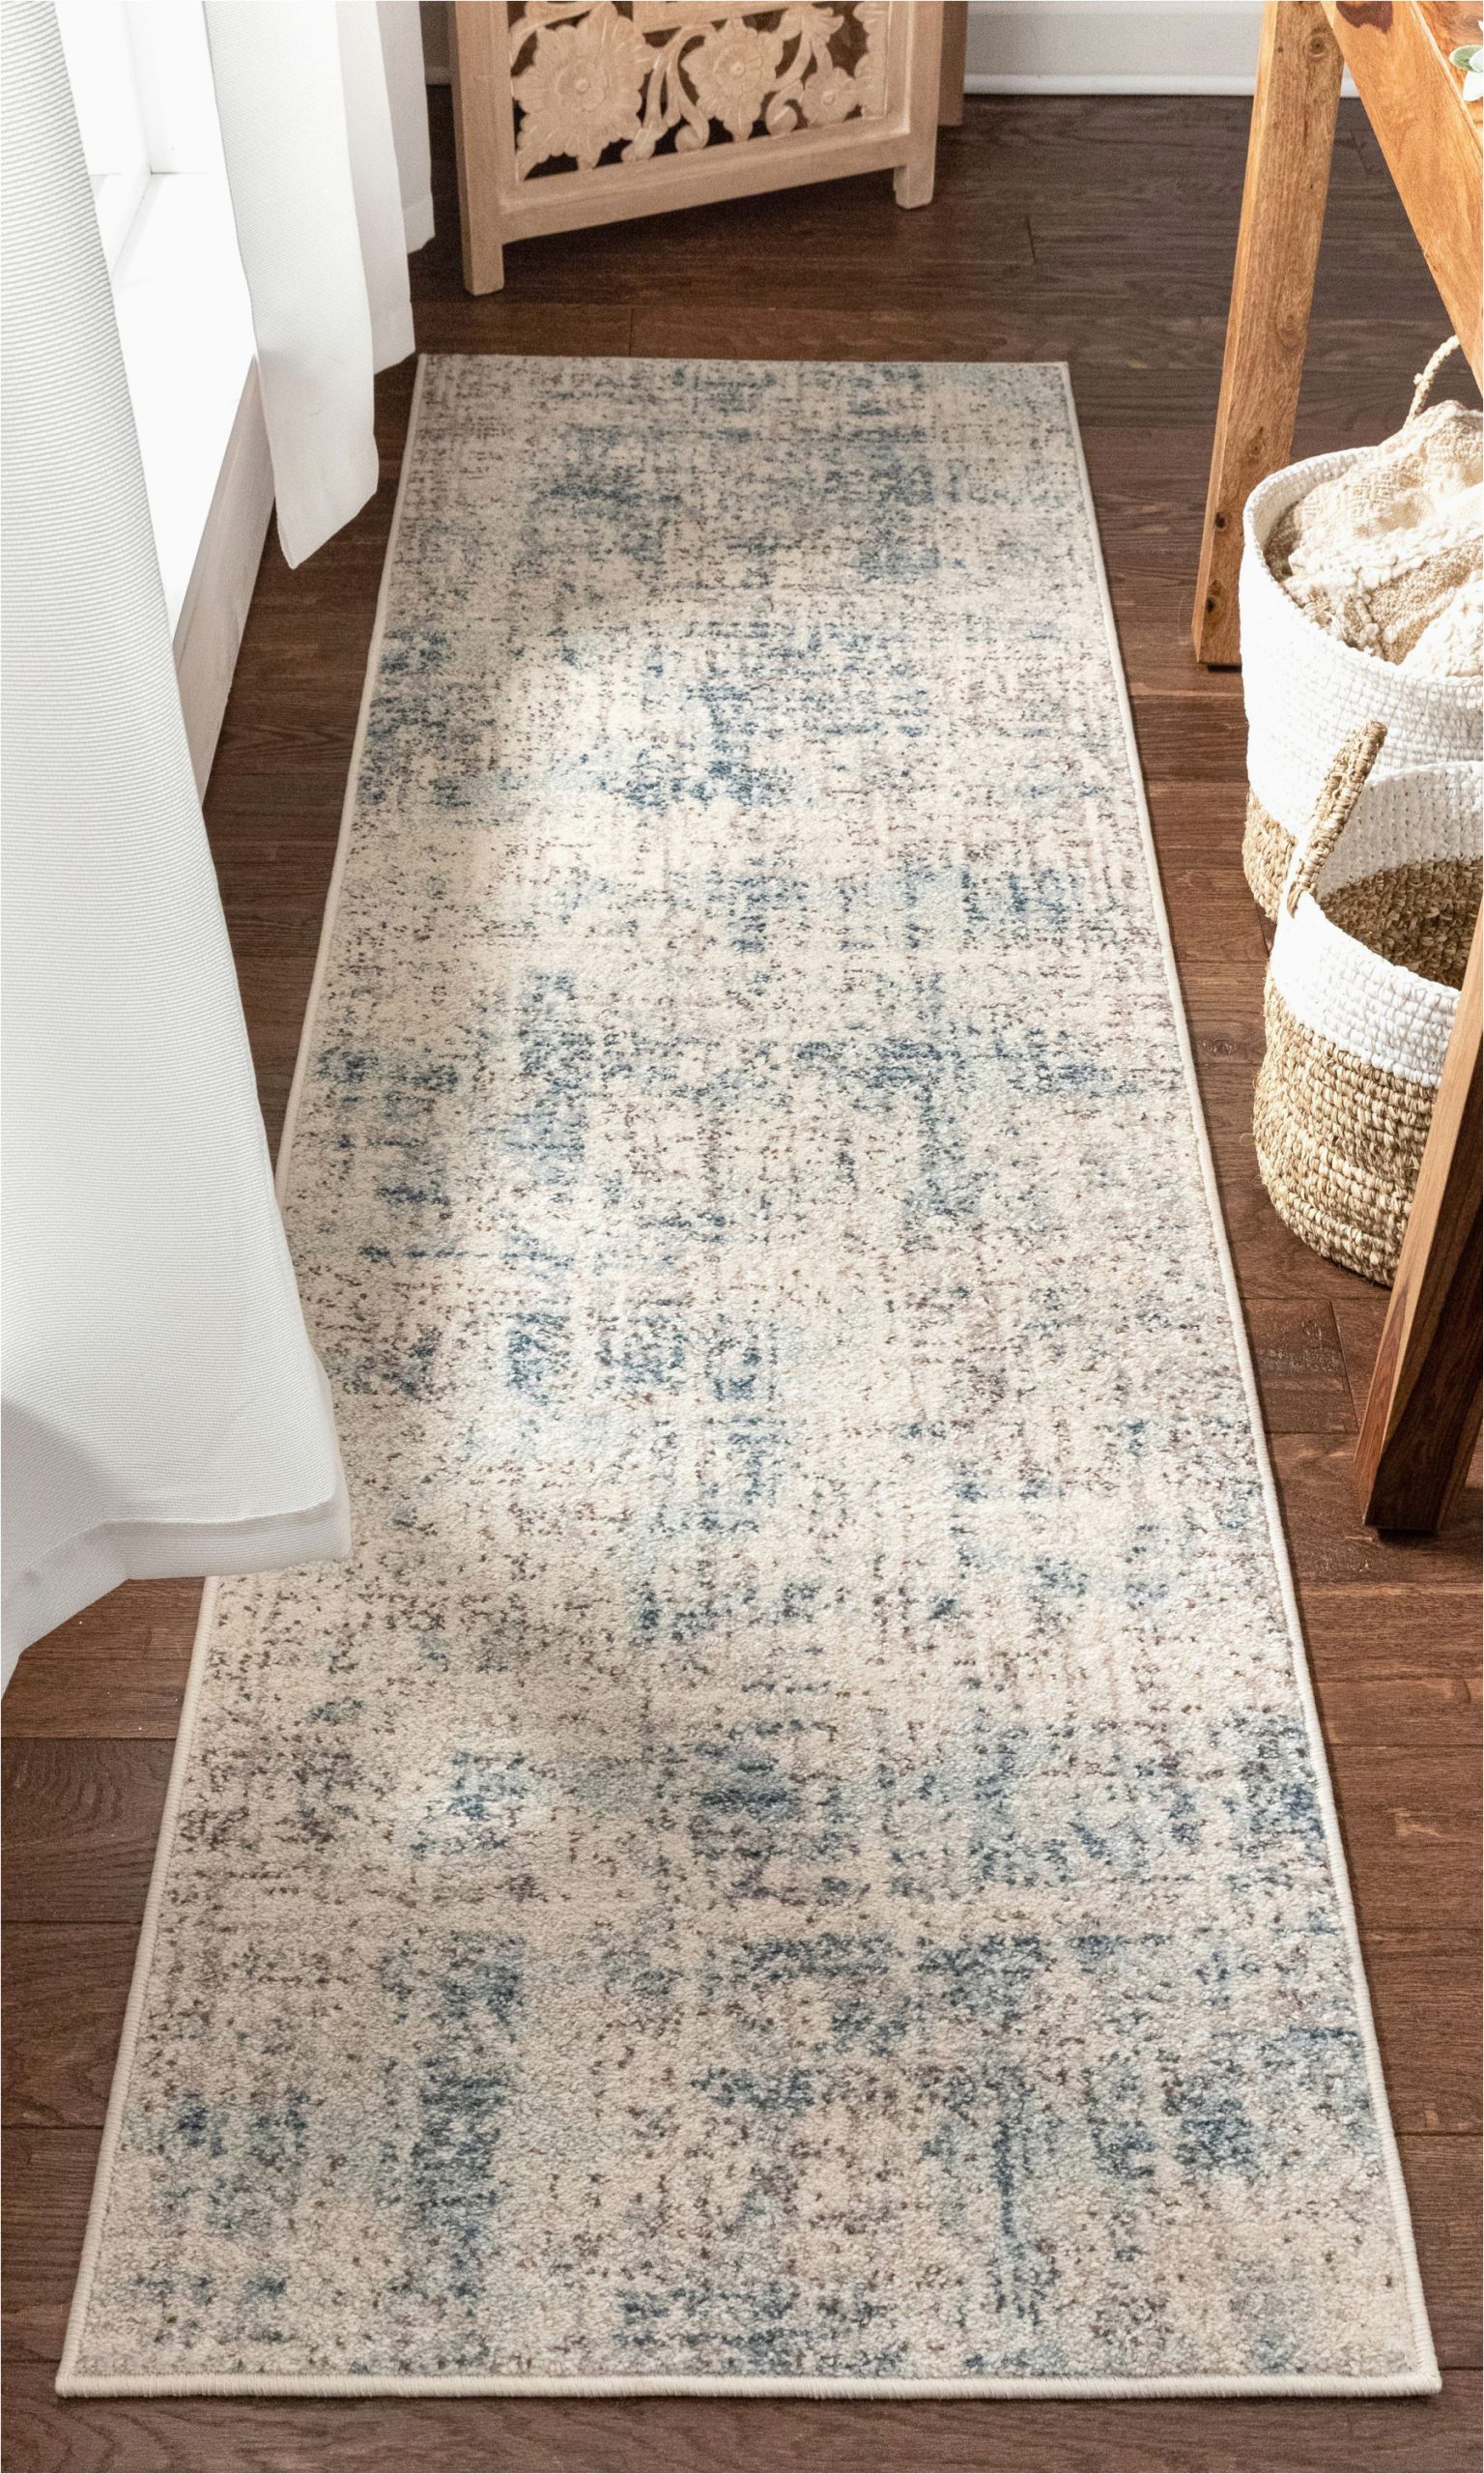 Brown and Blue area Rug Walmart Sydney Tate Blue Modern Abstract Distressed 2 3" X 7 3" Runner area Rug